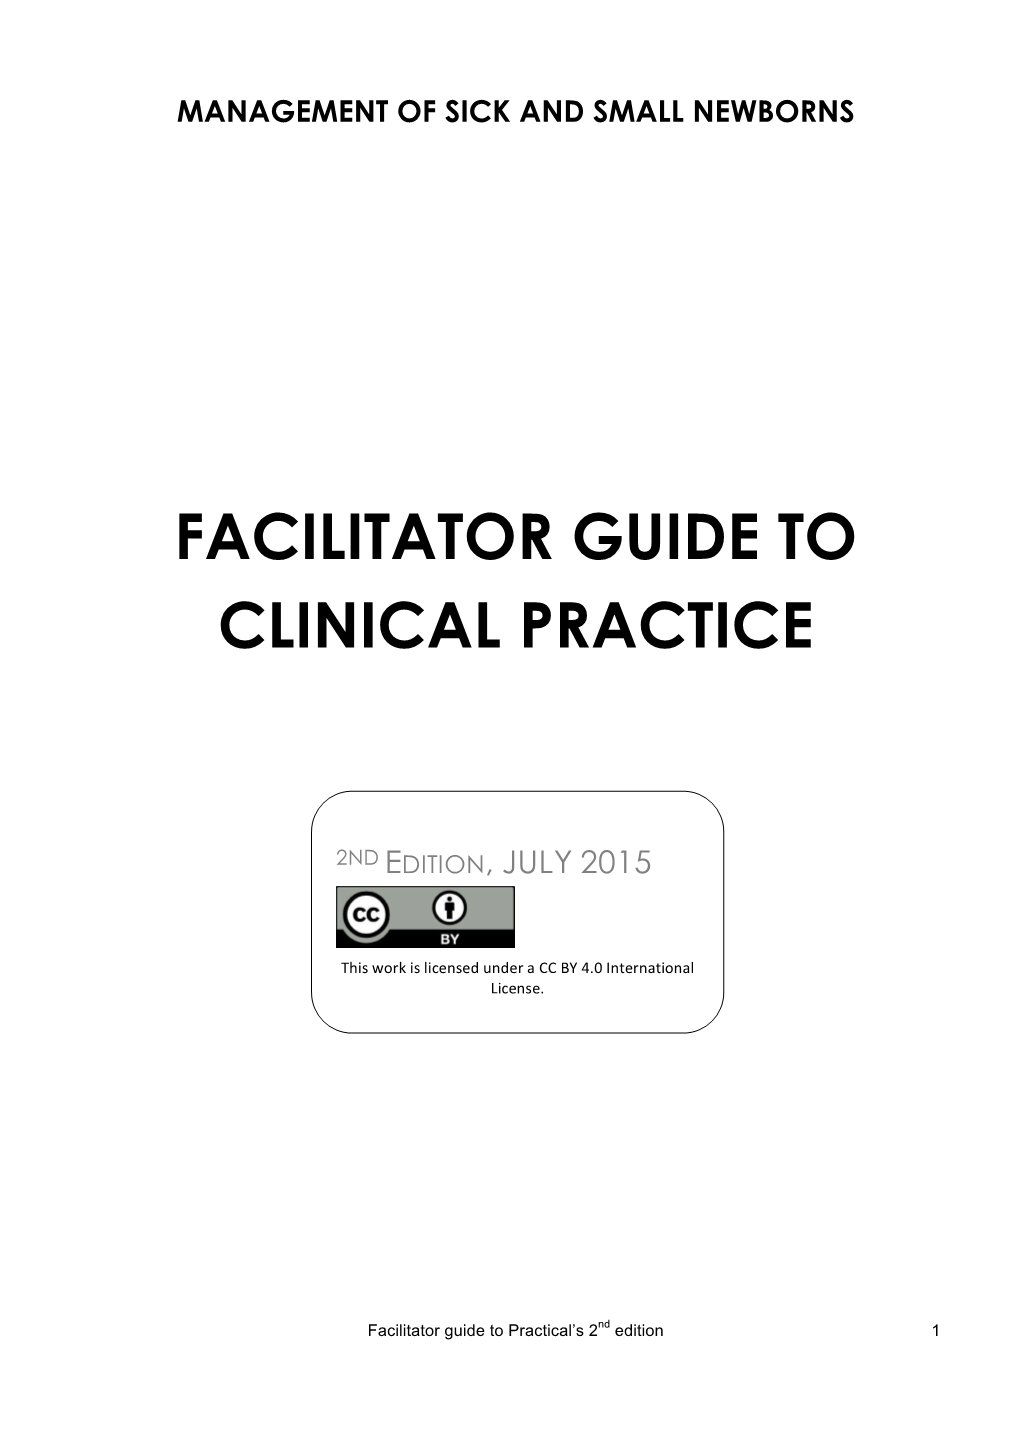 MSSN Facilitator Manual for Clinical Practice